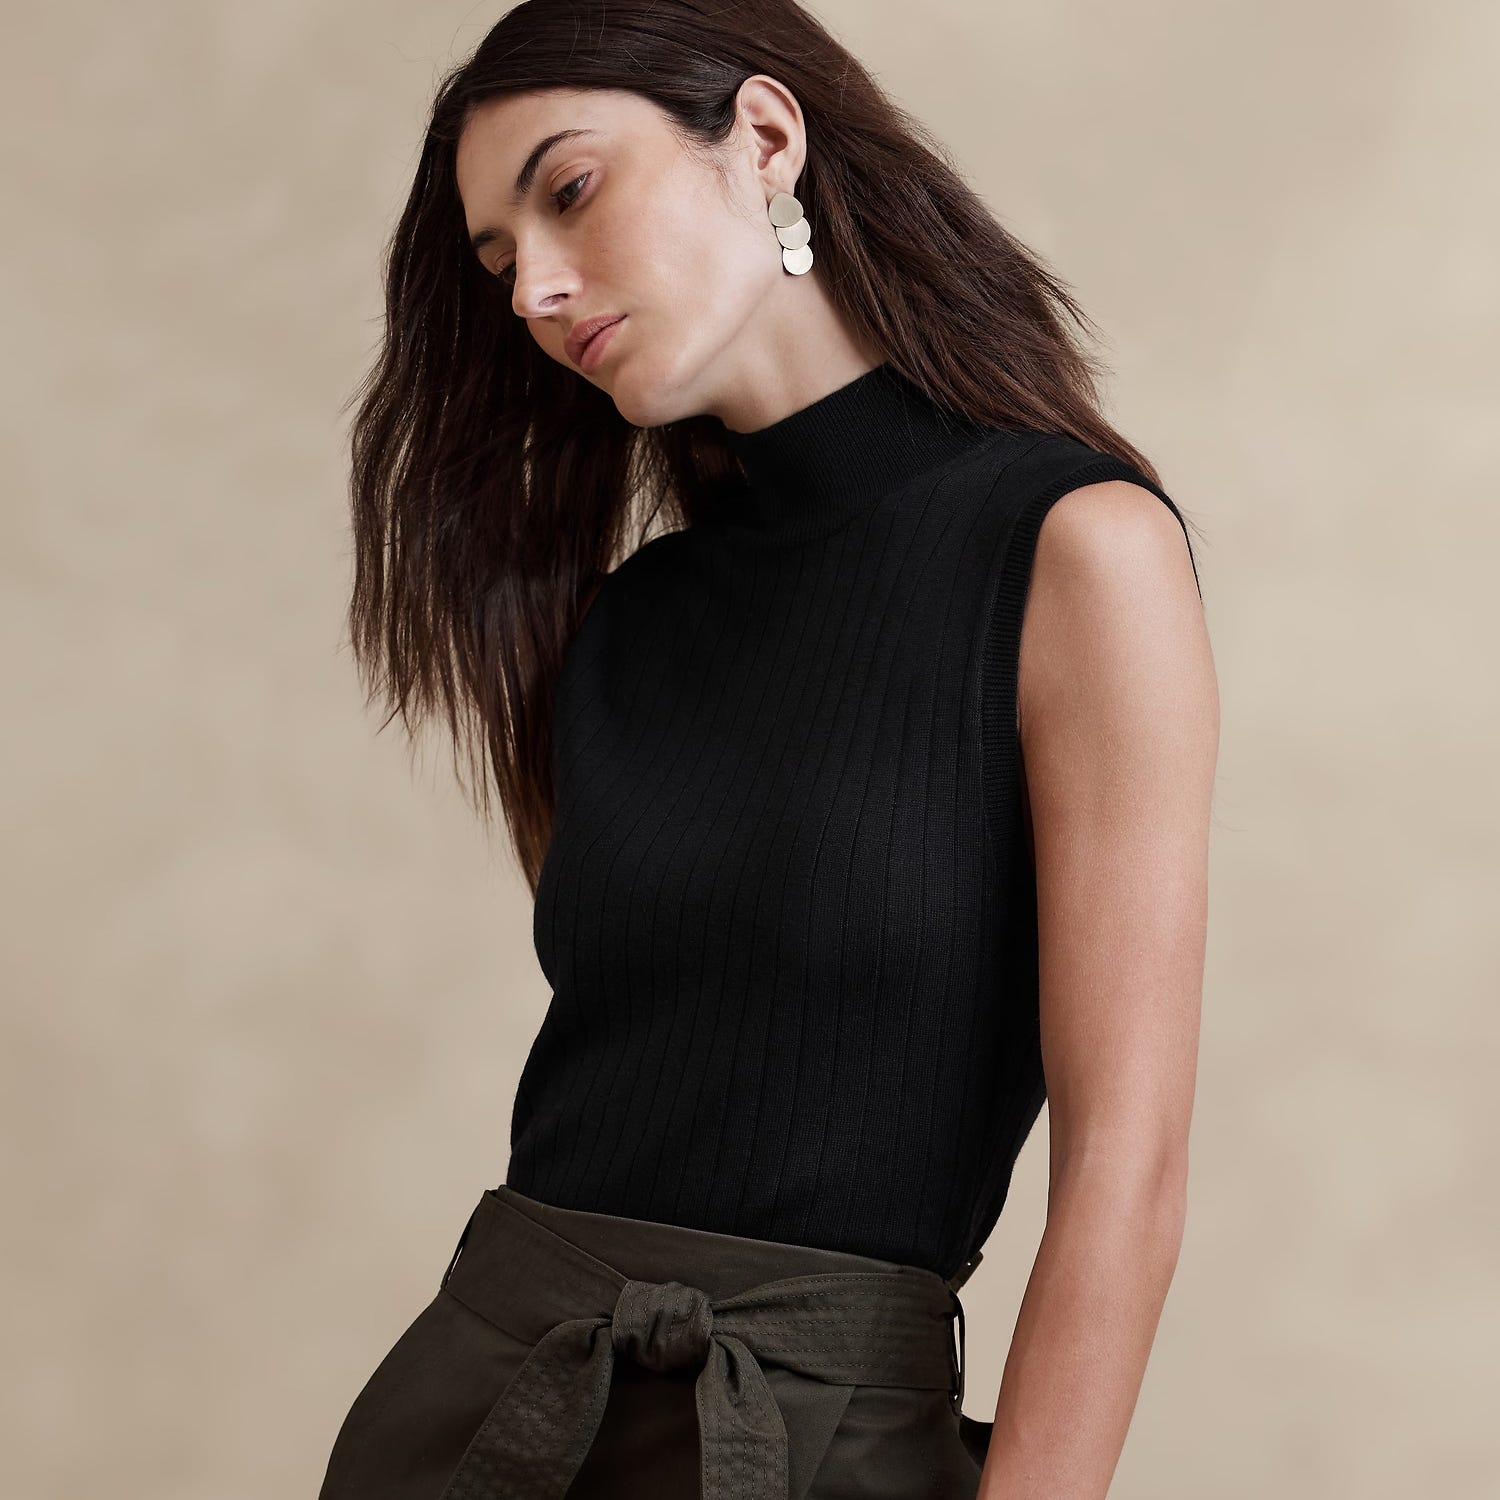 A woman wearing a black turtleneck sleeveless top, olive belt-cinched trousers, and large, circular white earrings.